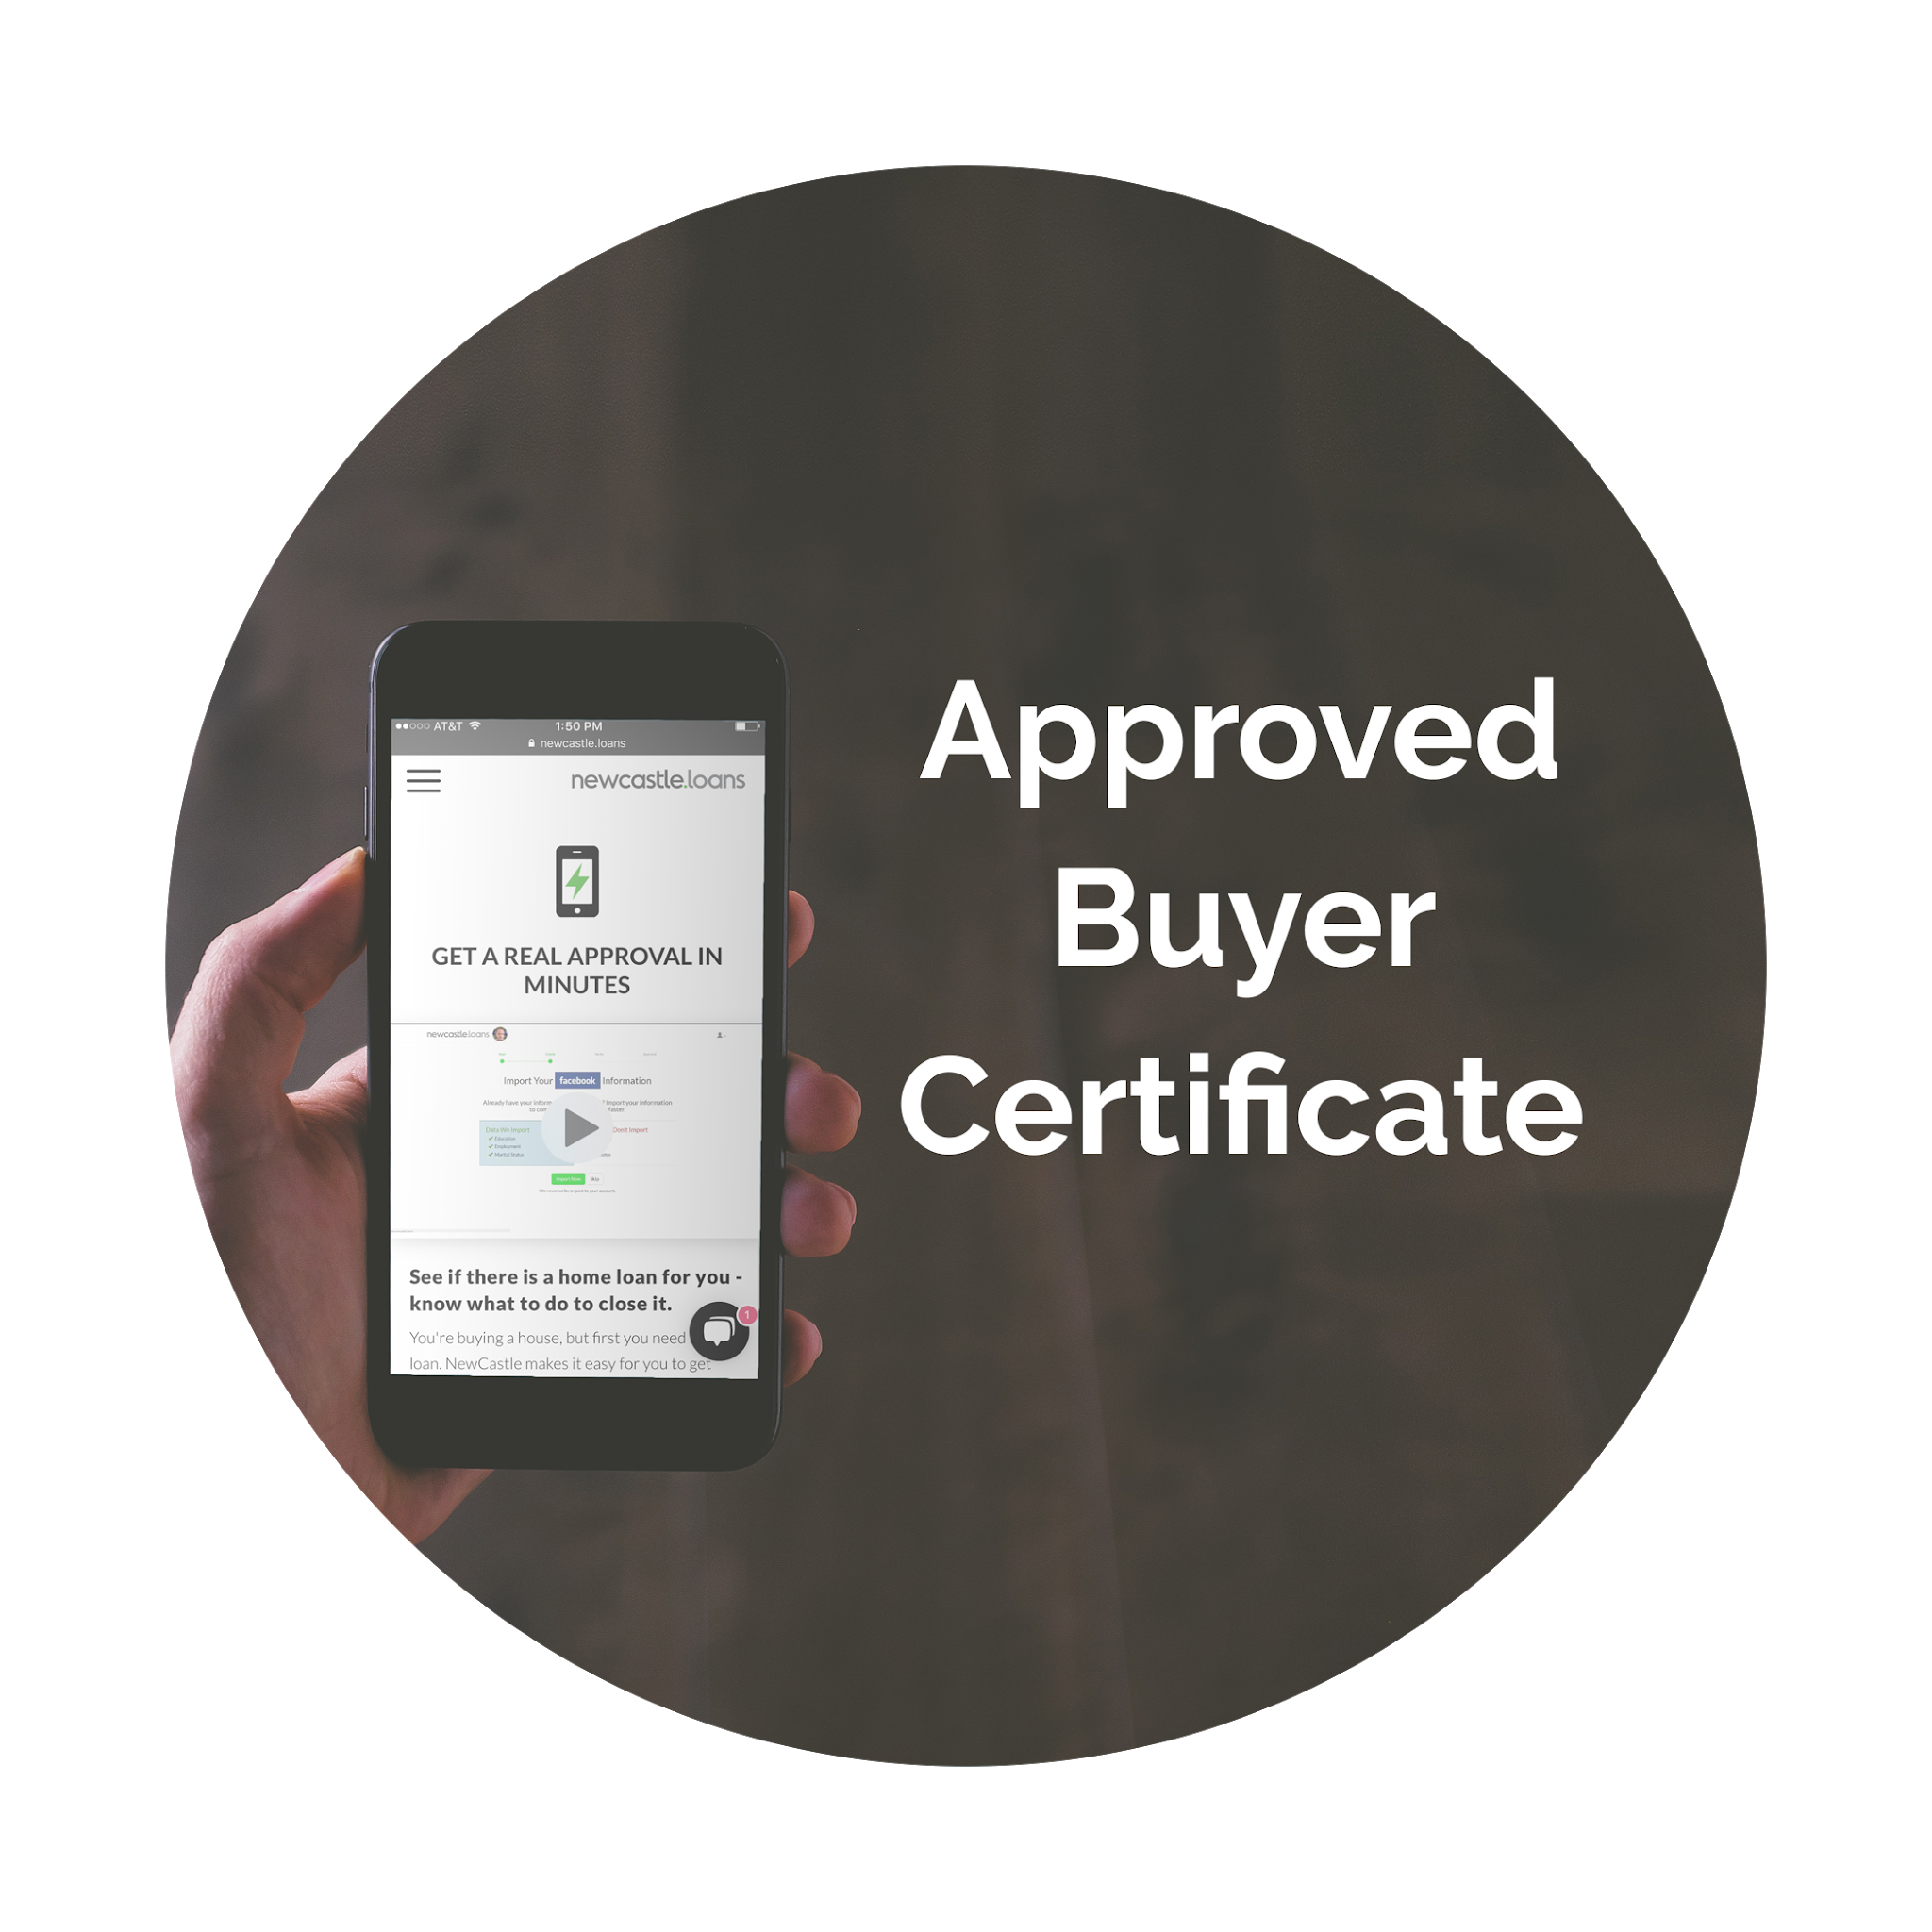 Approved Buyer Certificate